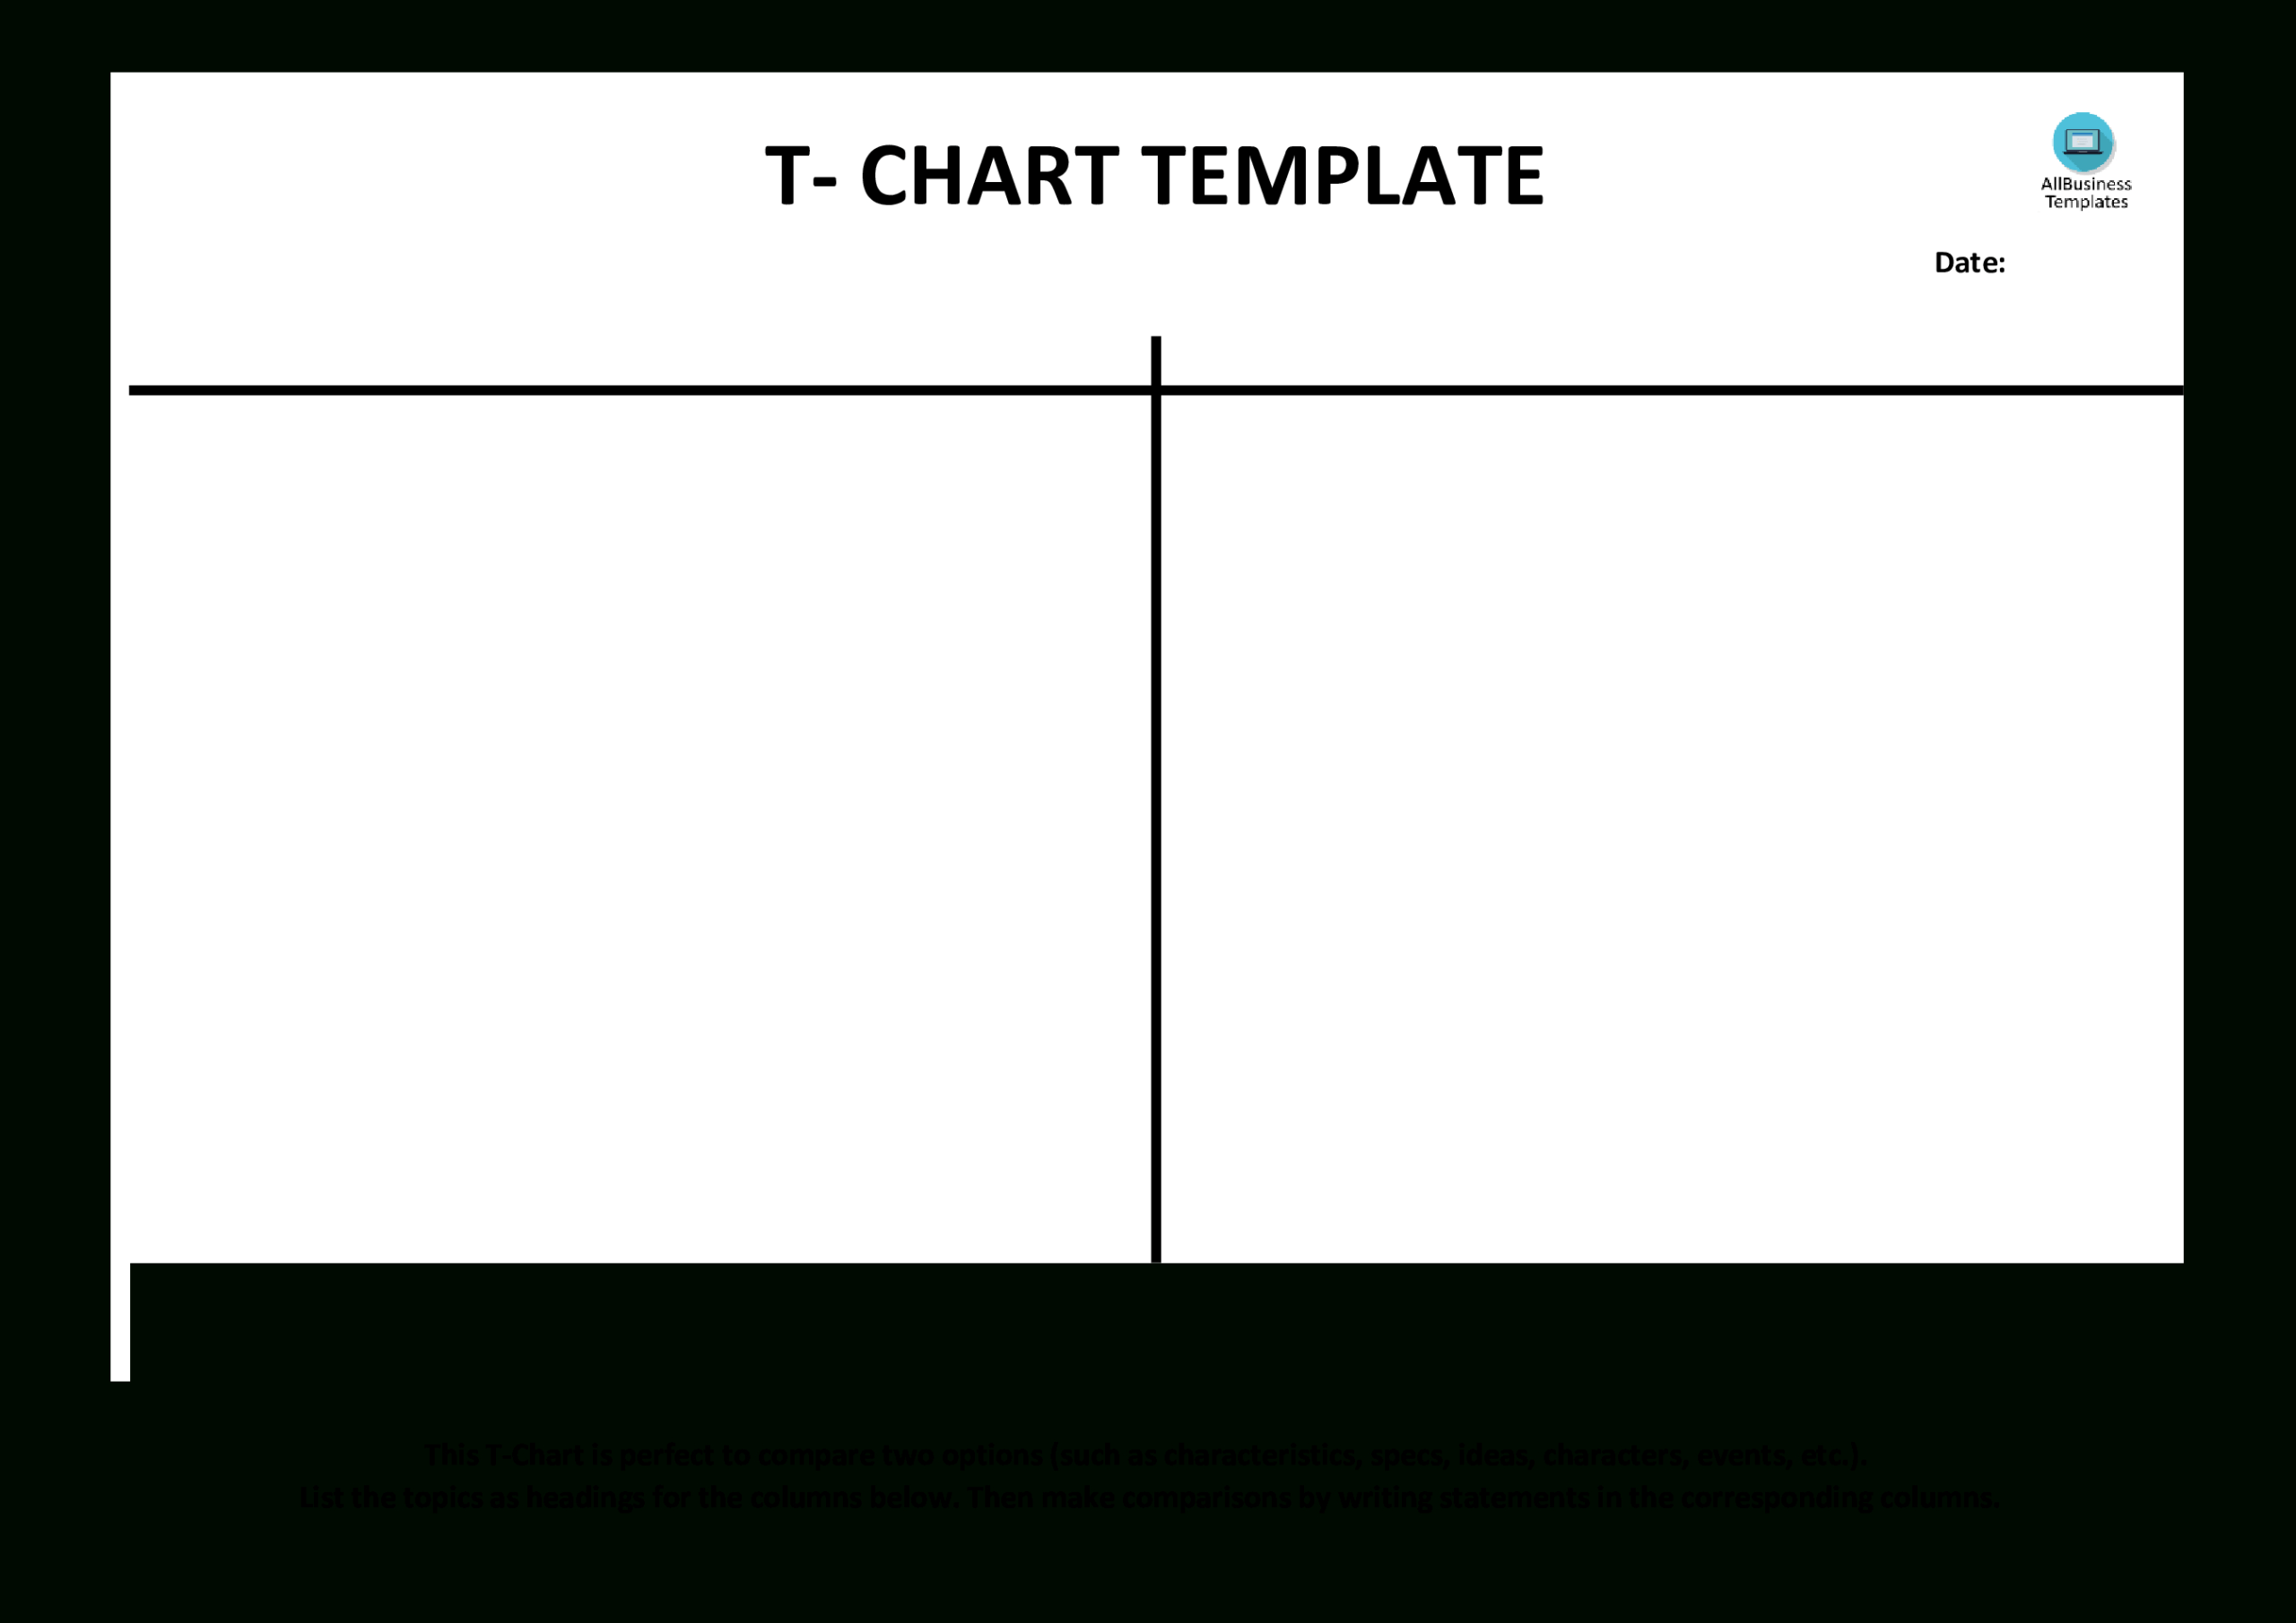 T Chart Example (Blank) | Templates At Allbusinesstemplates Inside T Chart Template For Word